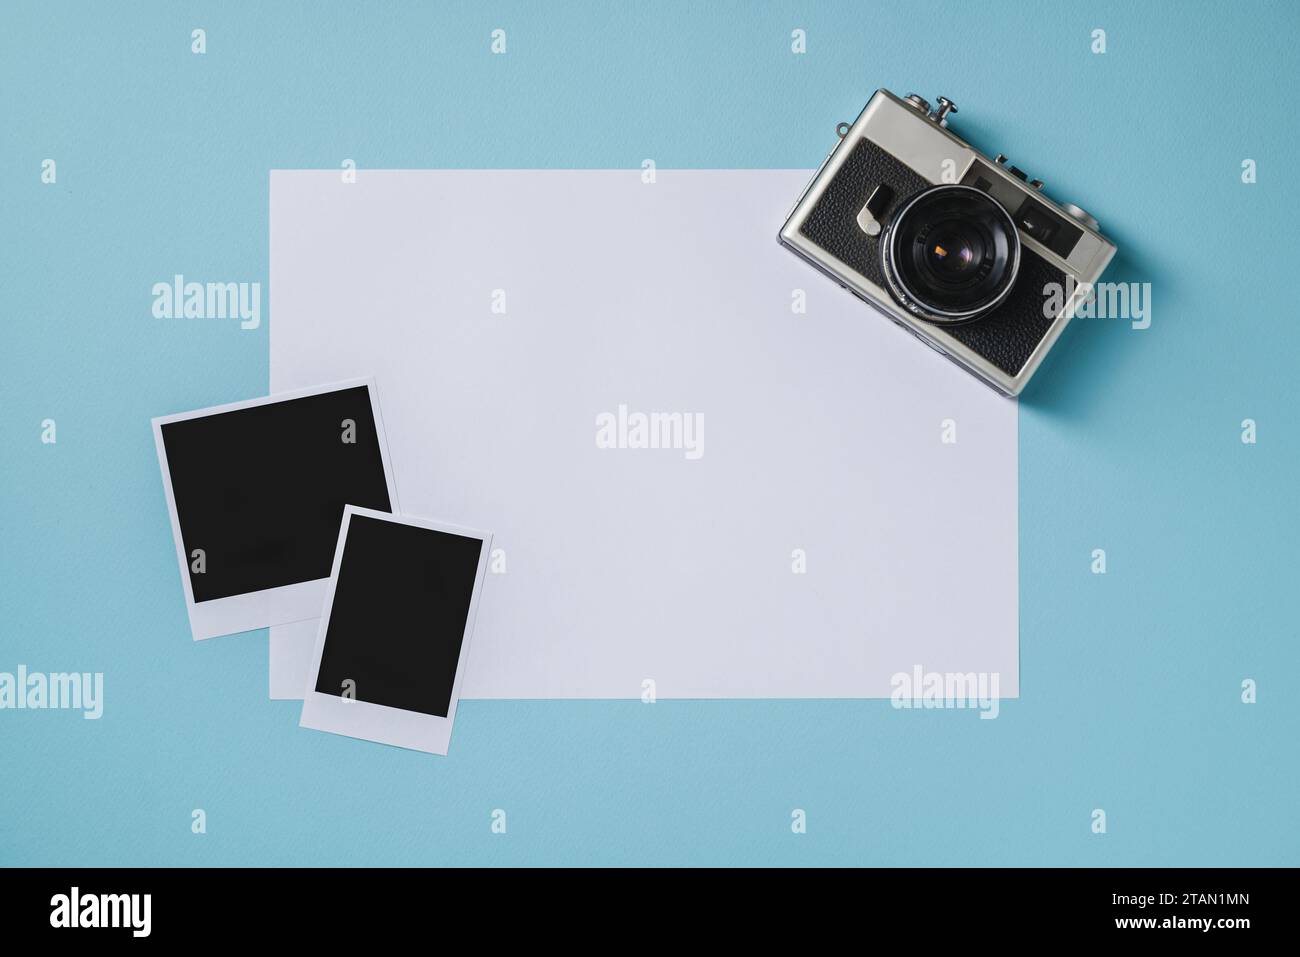 Vintage photo camera and empty photo frames on blue background. Travel moment concept Stock Photo